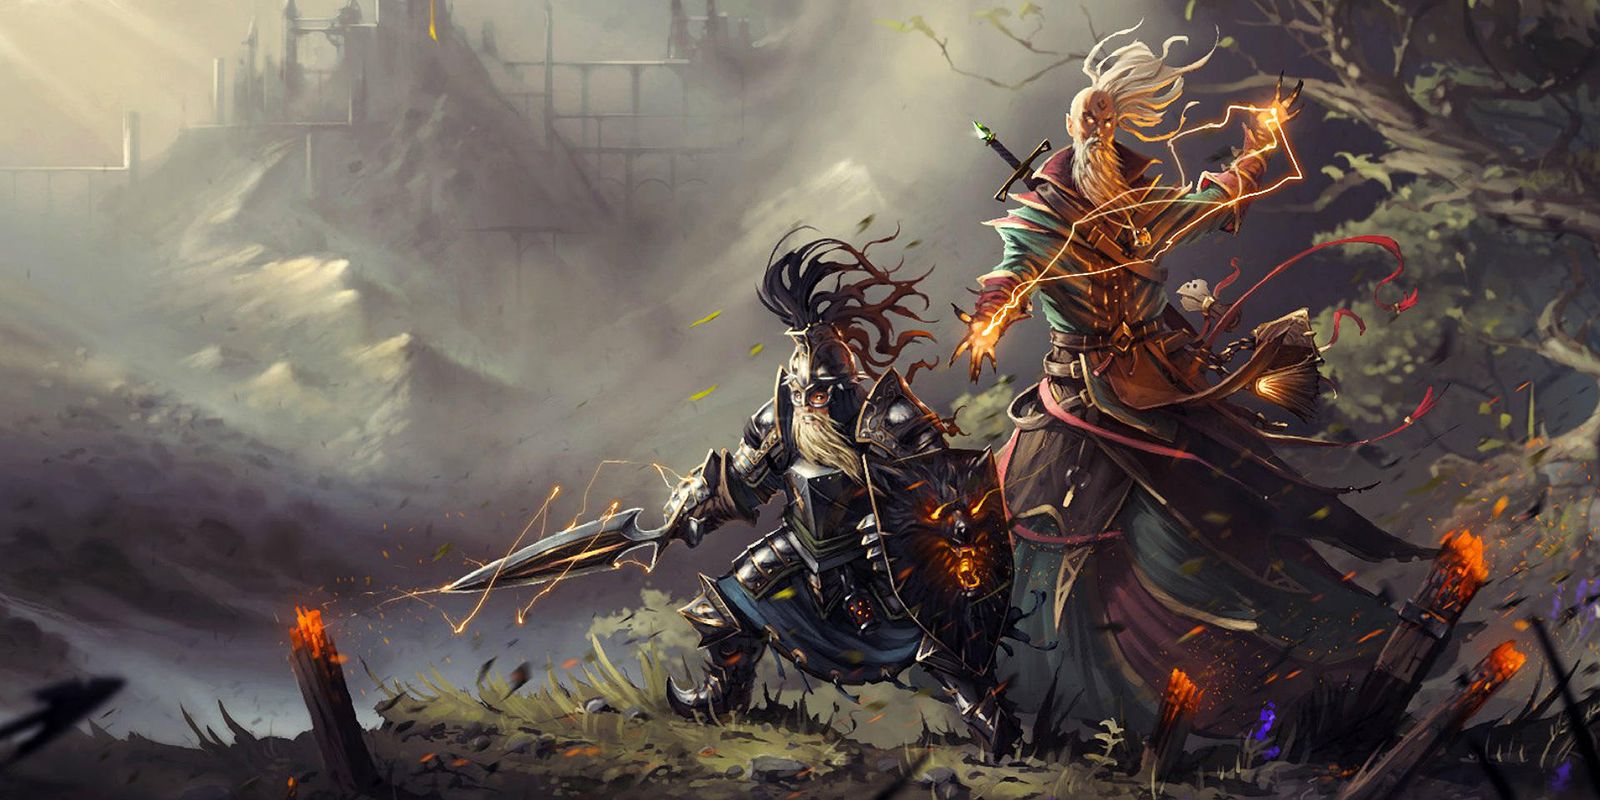 Divinity Original Sin 2 Promo Image Of Warrior And Mage Together